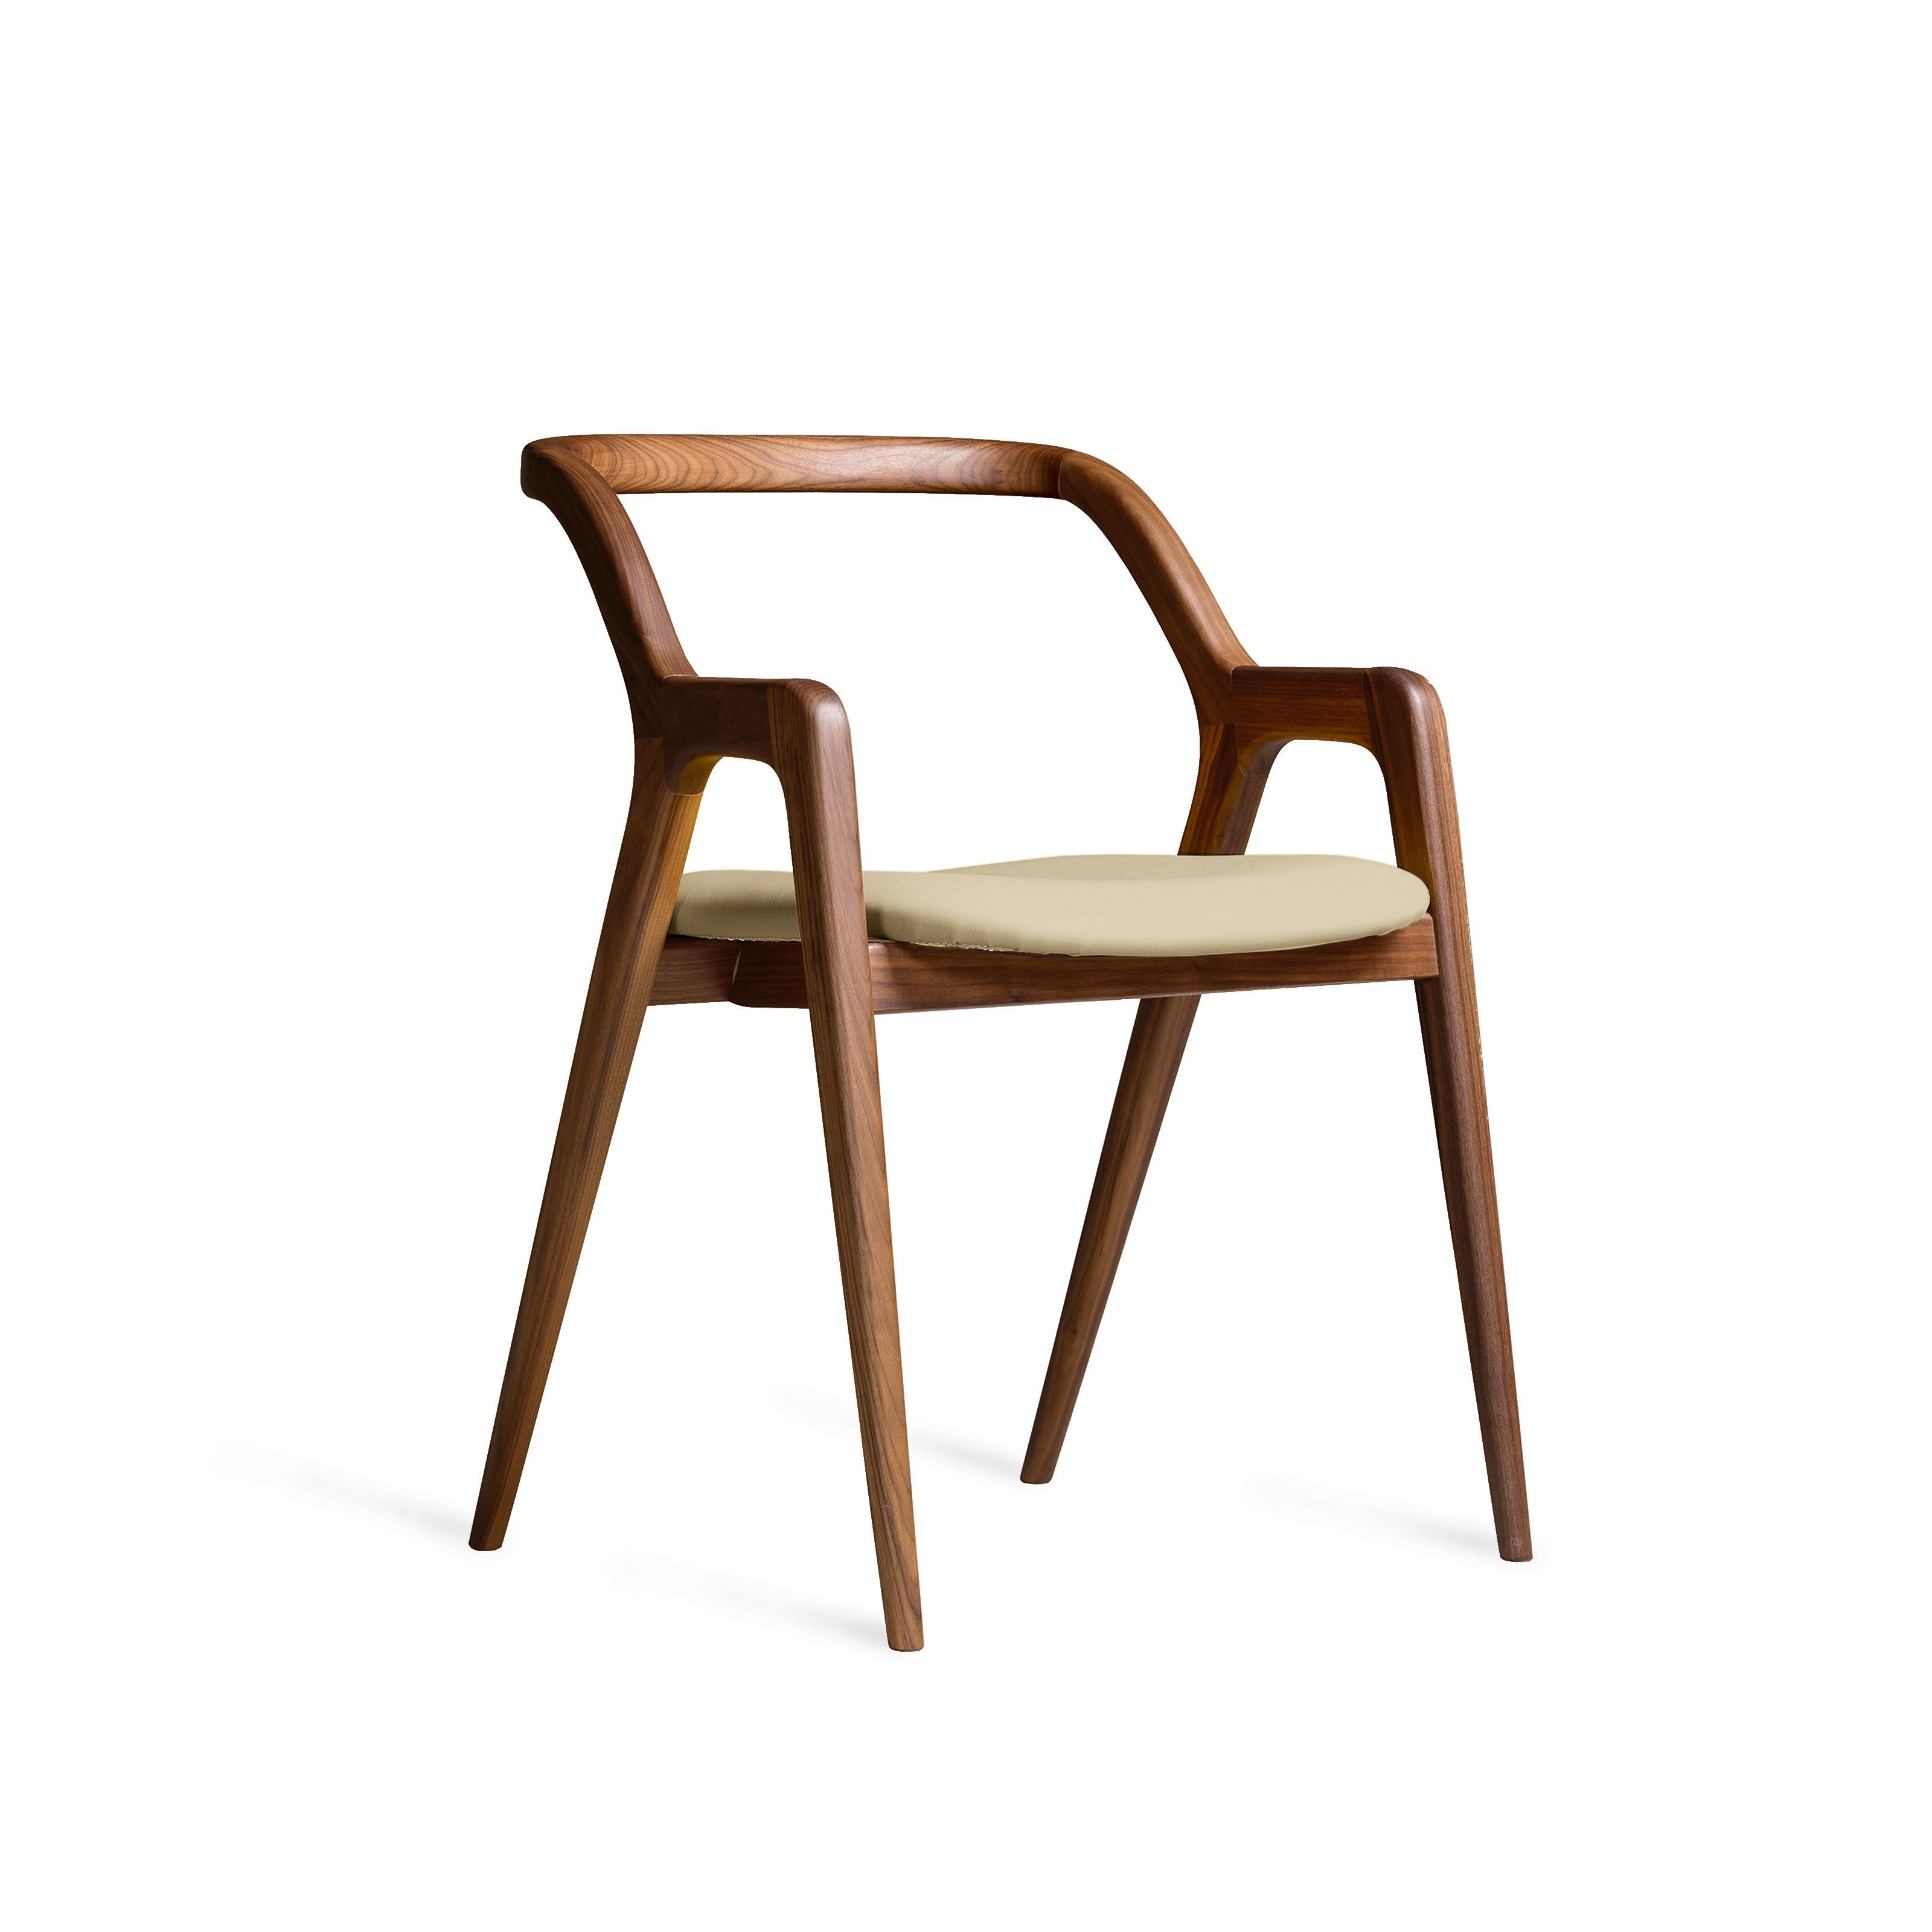 Oiled In breve Solid Wood Chair, Walnut in Hand-Made Natural Finish, Contemporary For Sale